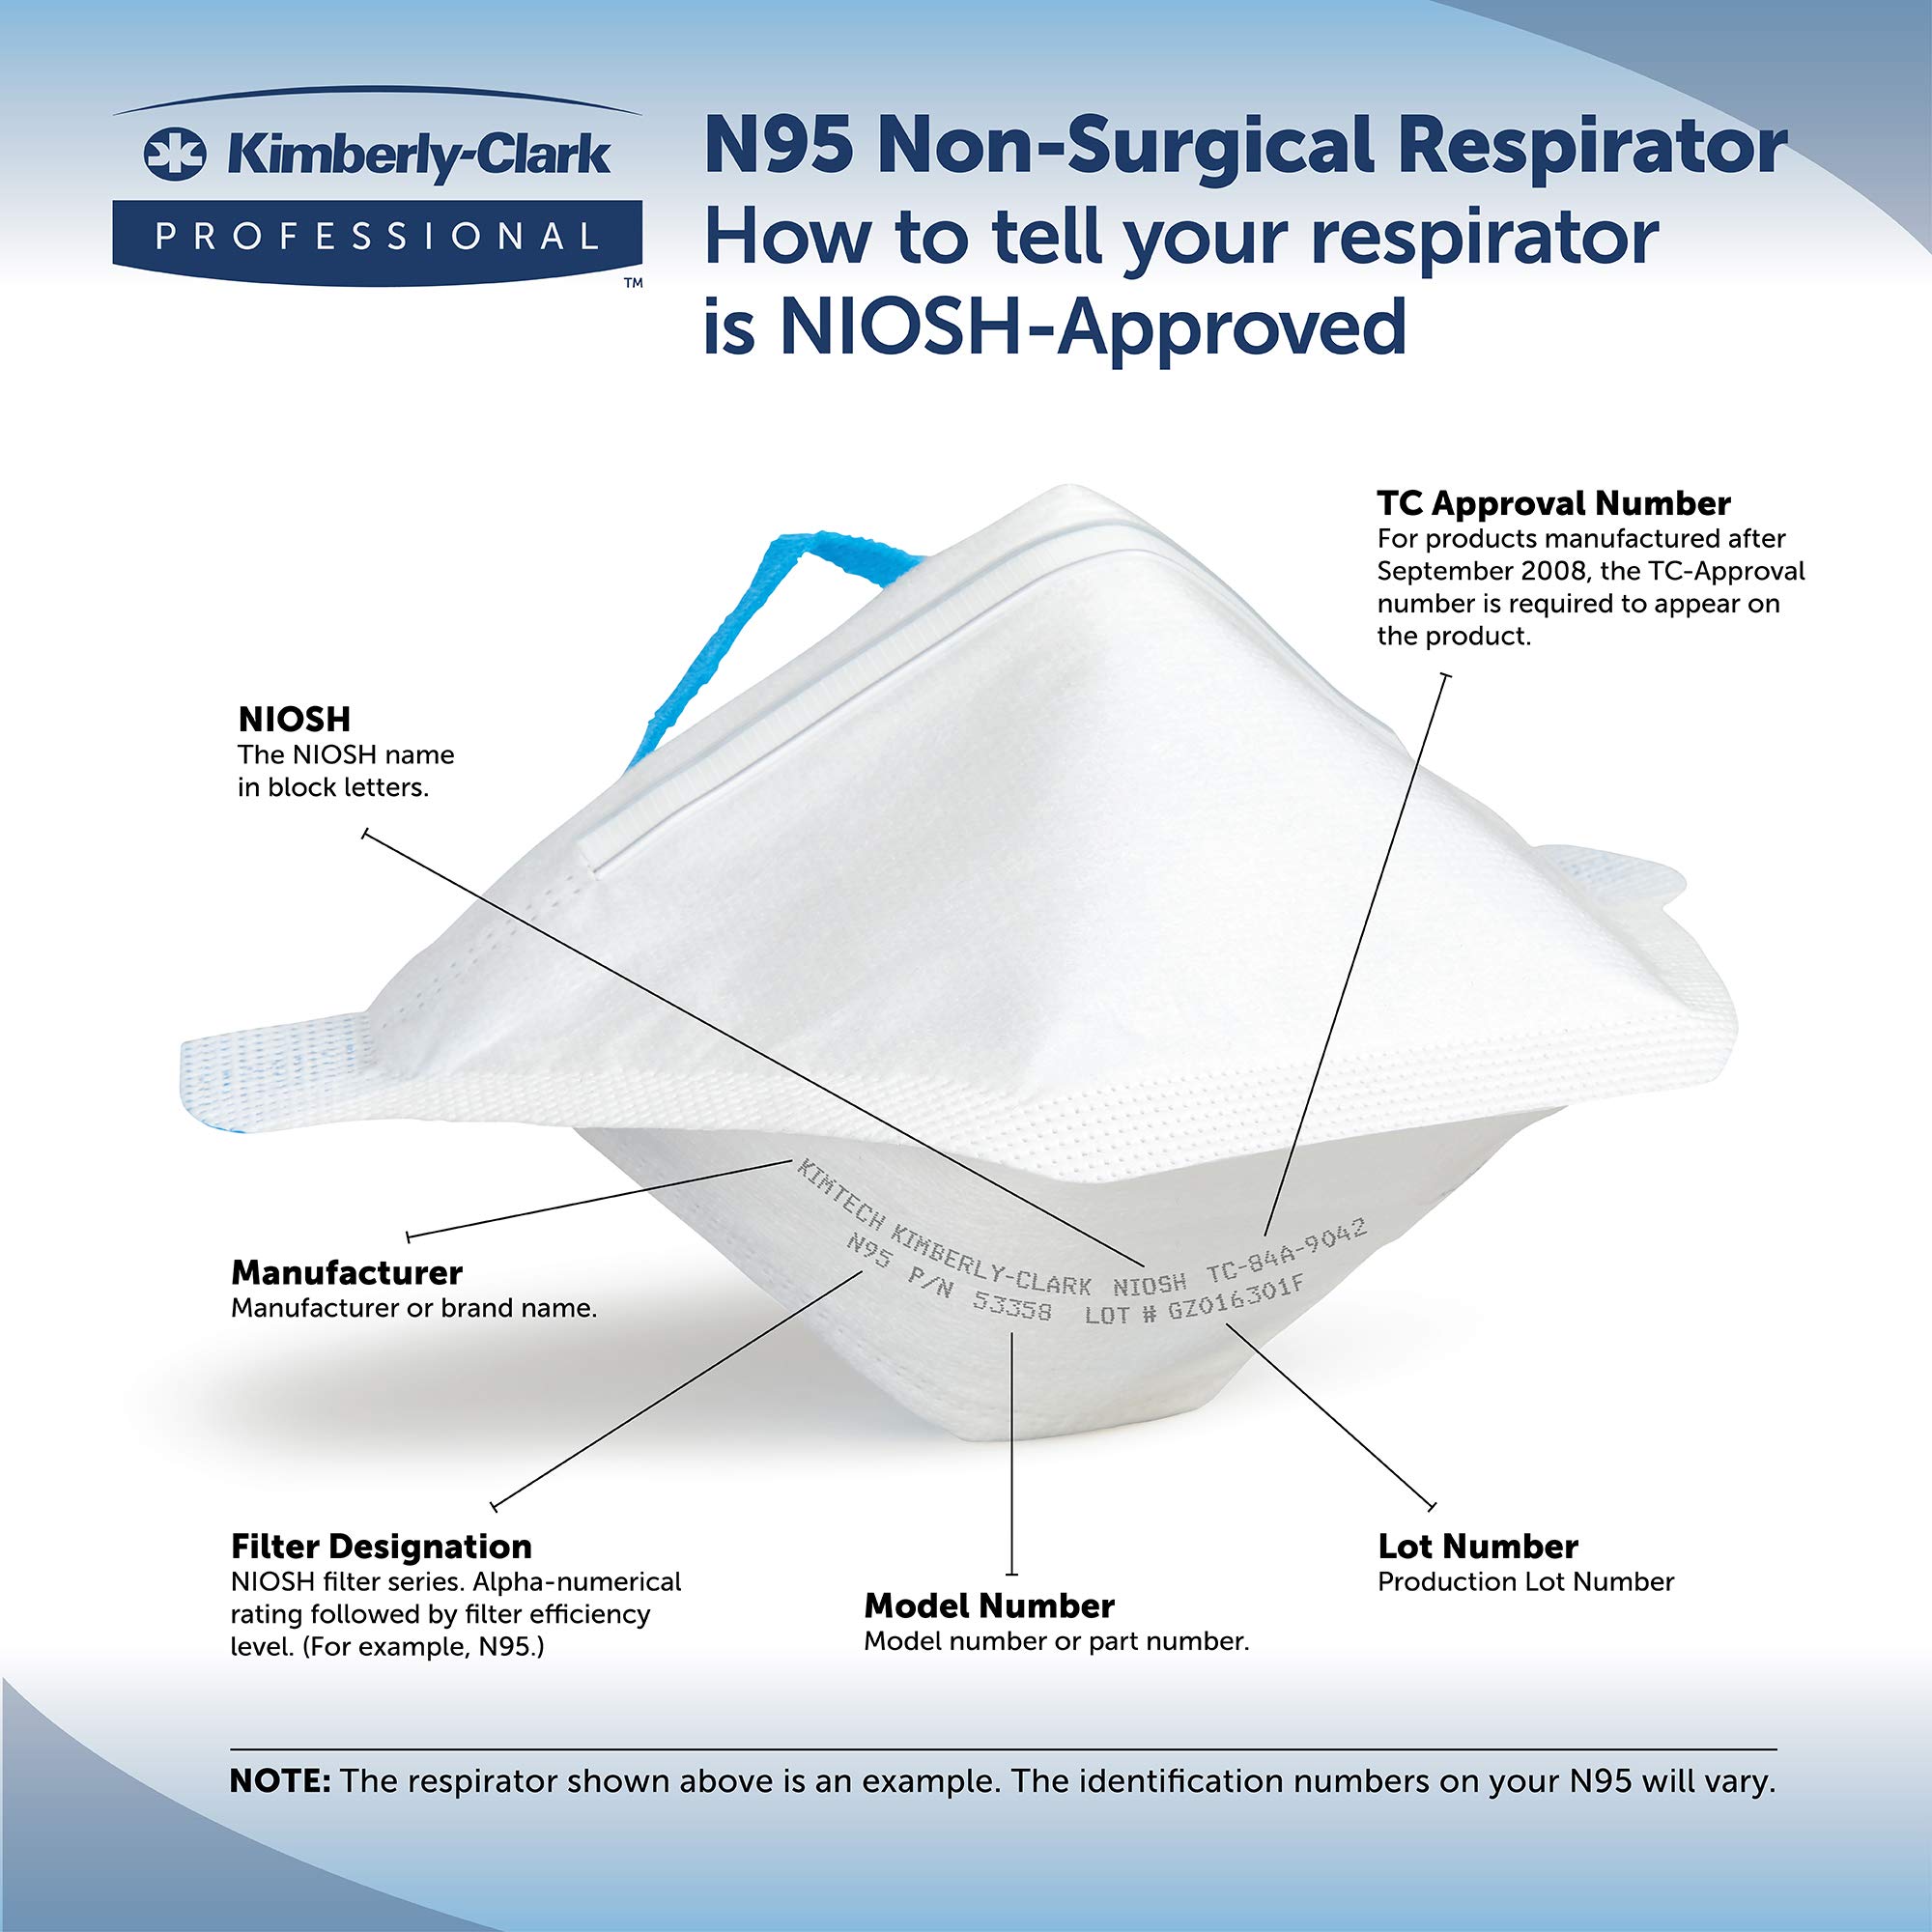 Kimberly-Clark PROFESSIONAL N95 Pouch Respirator (53358), NIOSH-Approved, Made in U.S.A, Regular Size, 50 Respirators/Bag, White